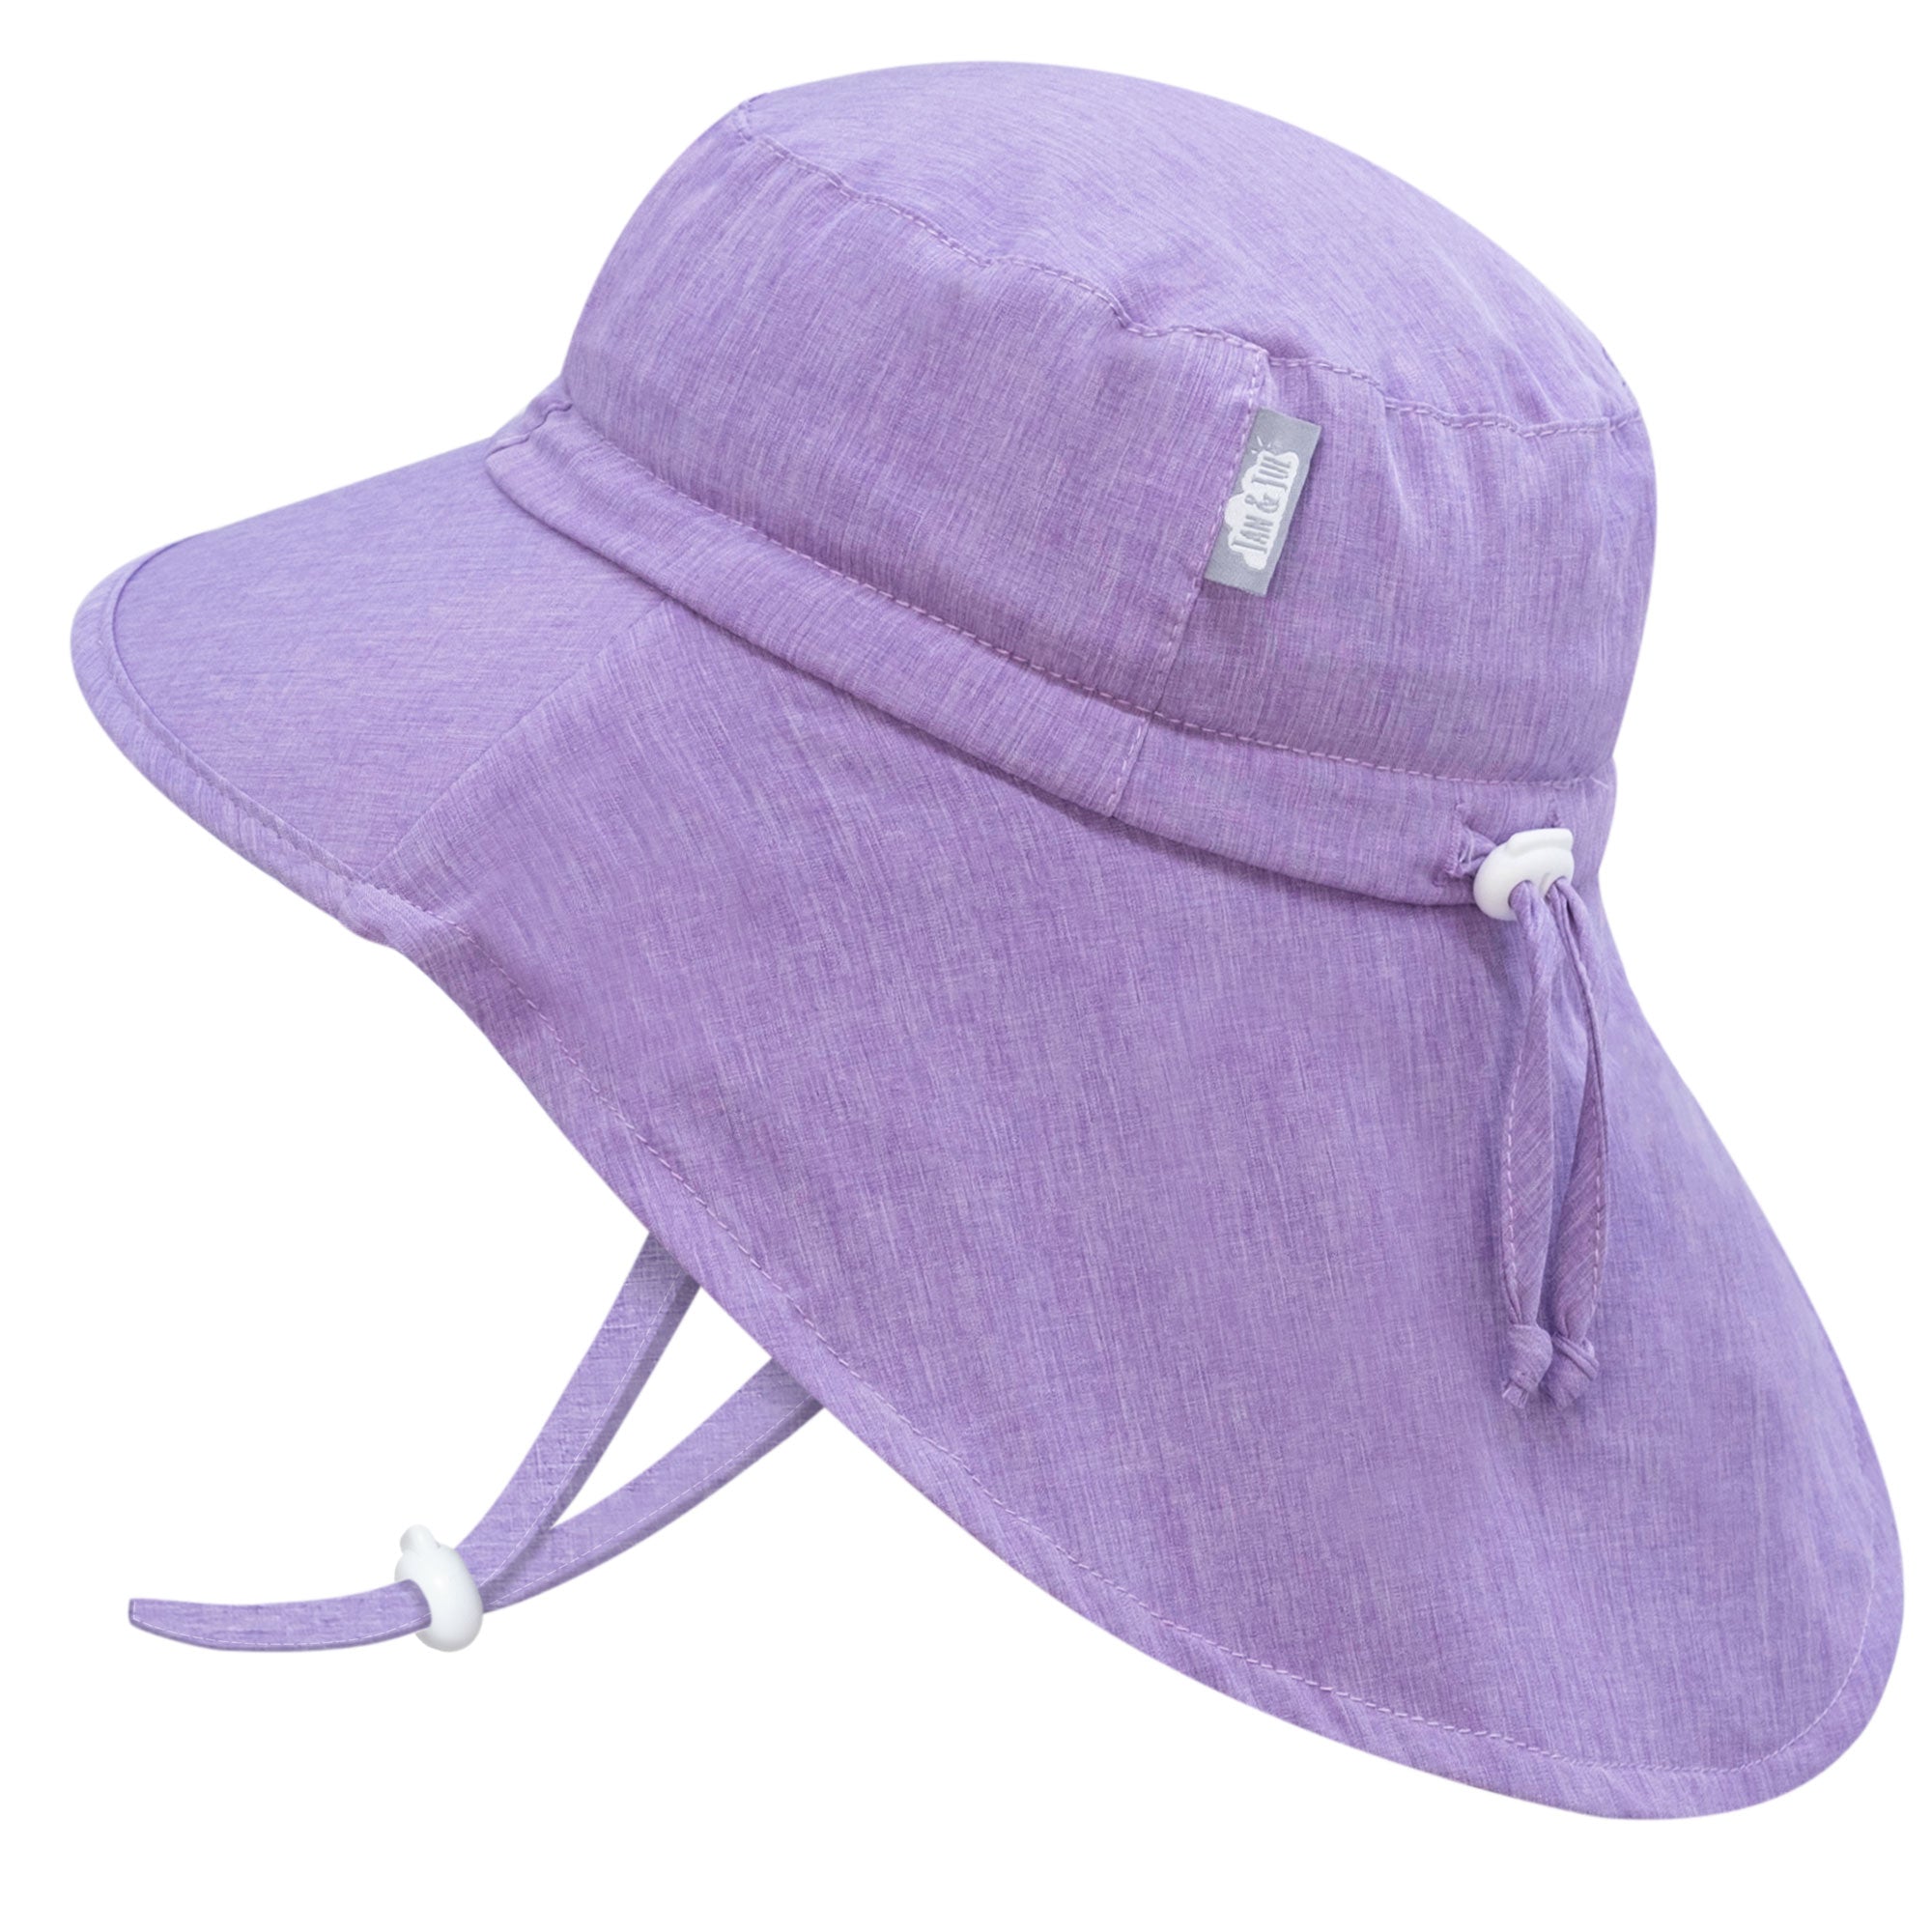 Jan & Jul Newborn Sun-Hat with Strap, Adjustable for Growth with Strap (S:  0-6 months, Grey)